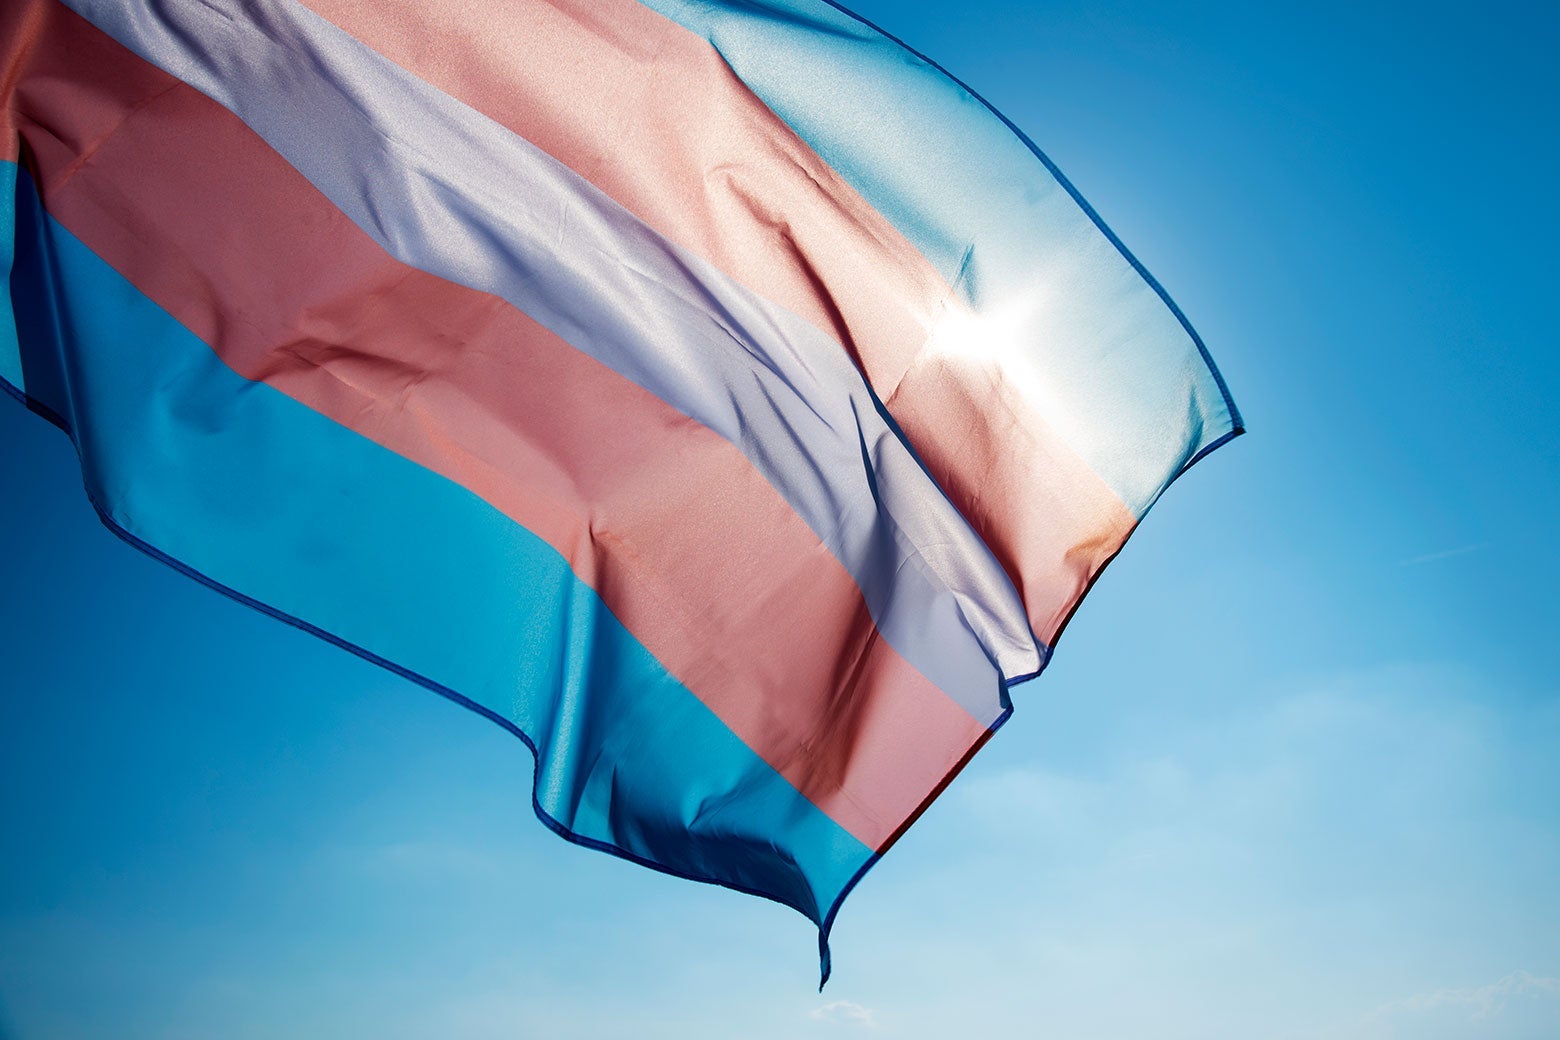 The transgender flag (blue, pink, and white lines) against a sunny blue sky.